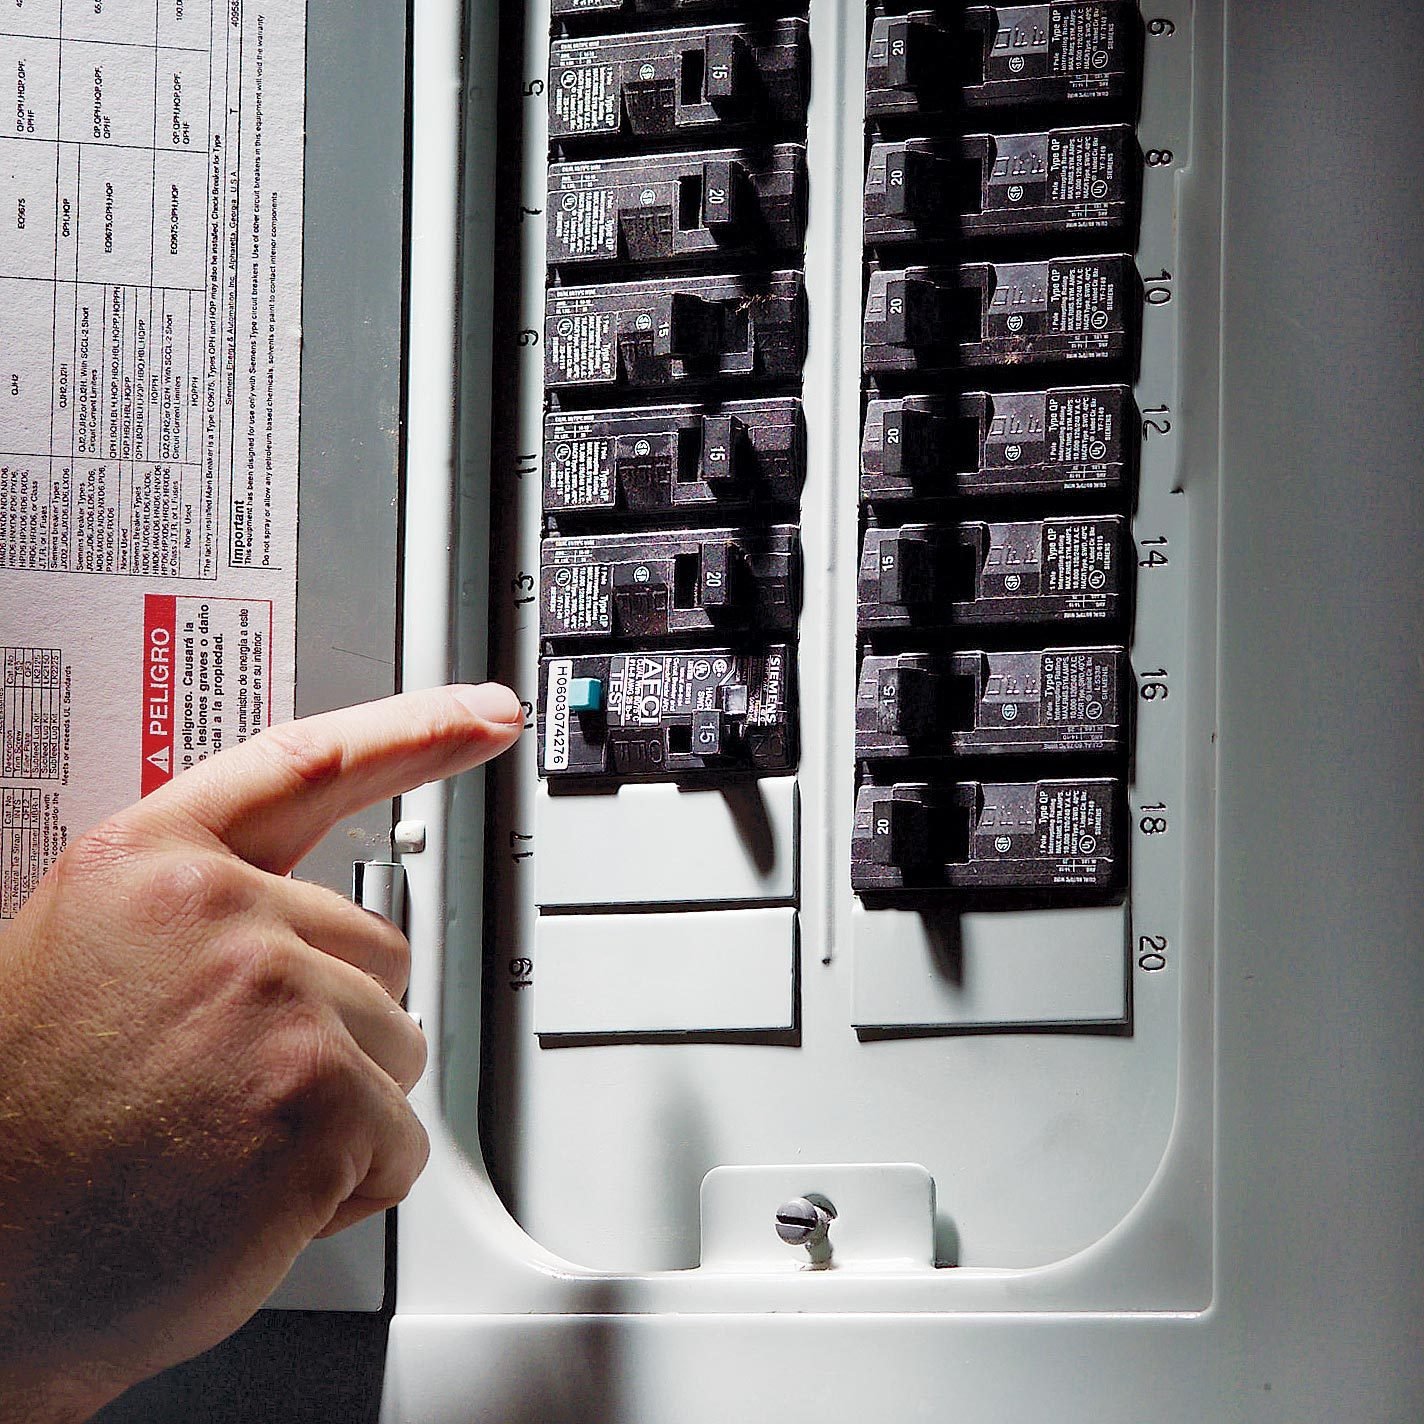 Identifying the Different Types of Circuit Breakers Family Handyman